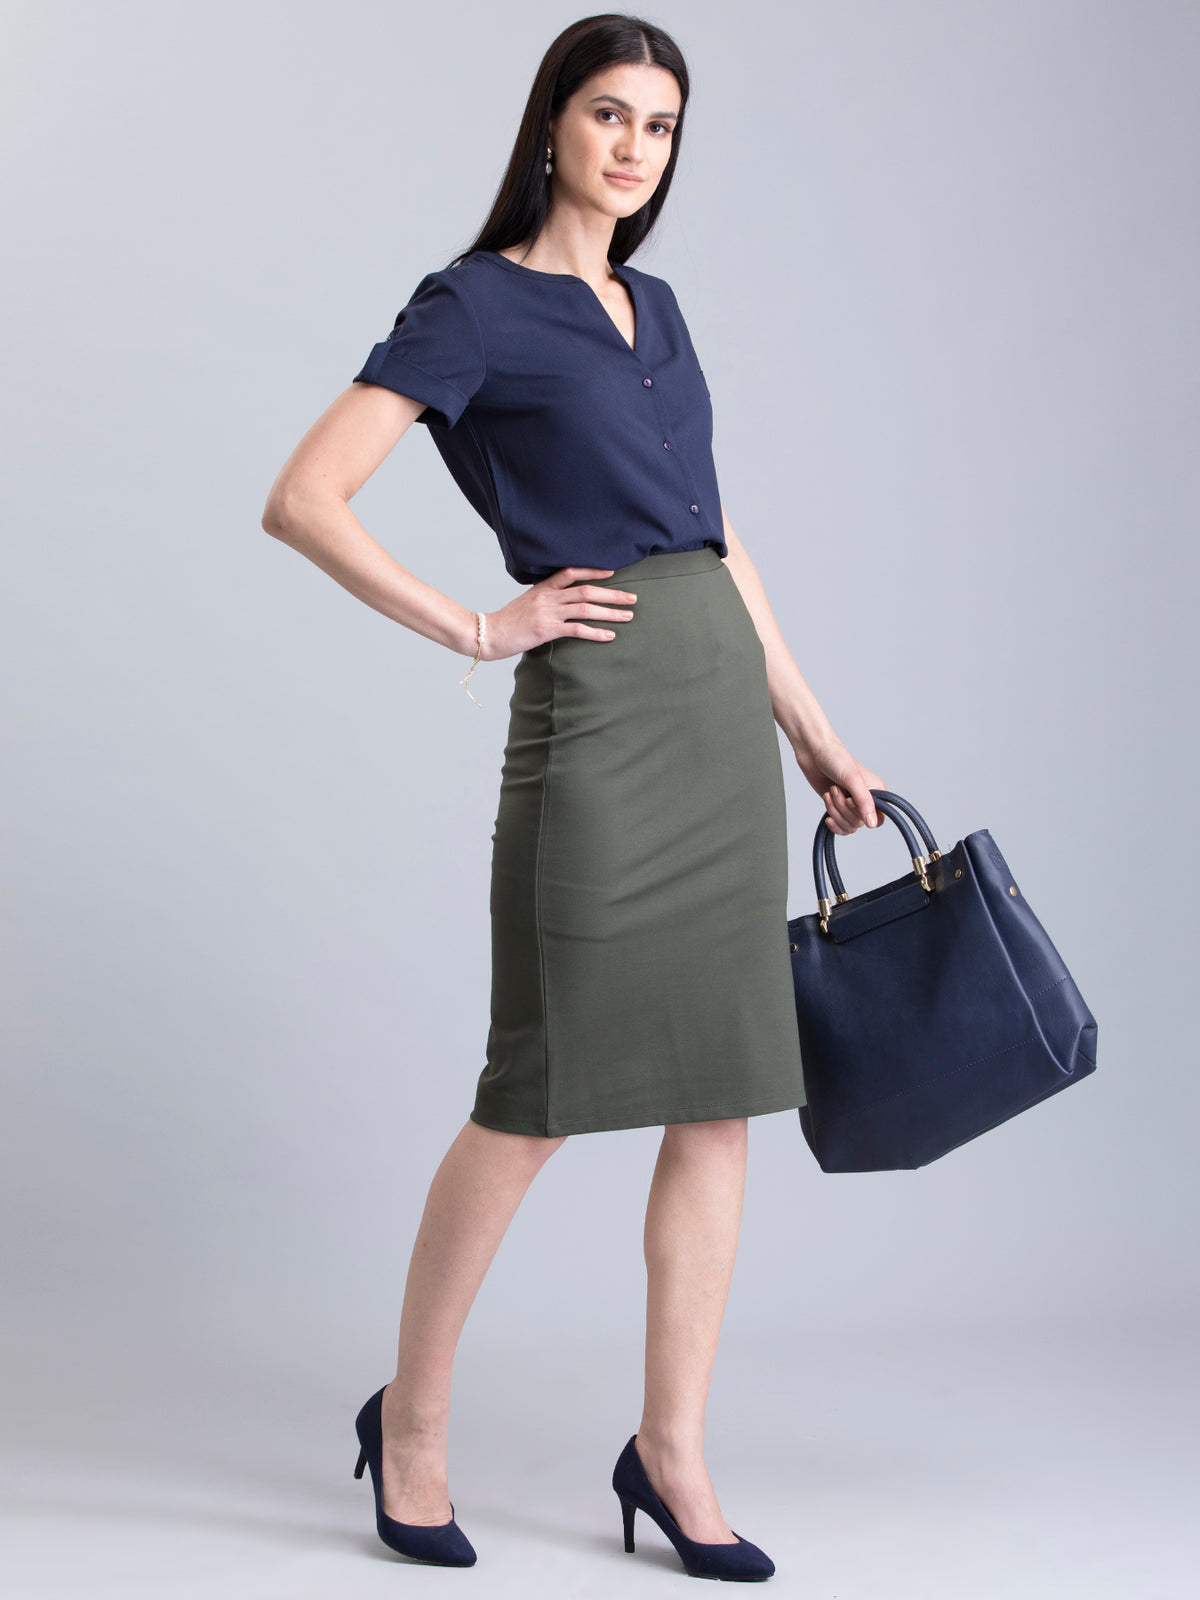 Elasticated Knitted Pencil Skirt - Olive